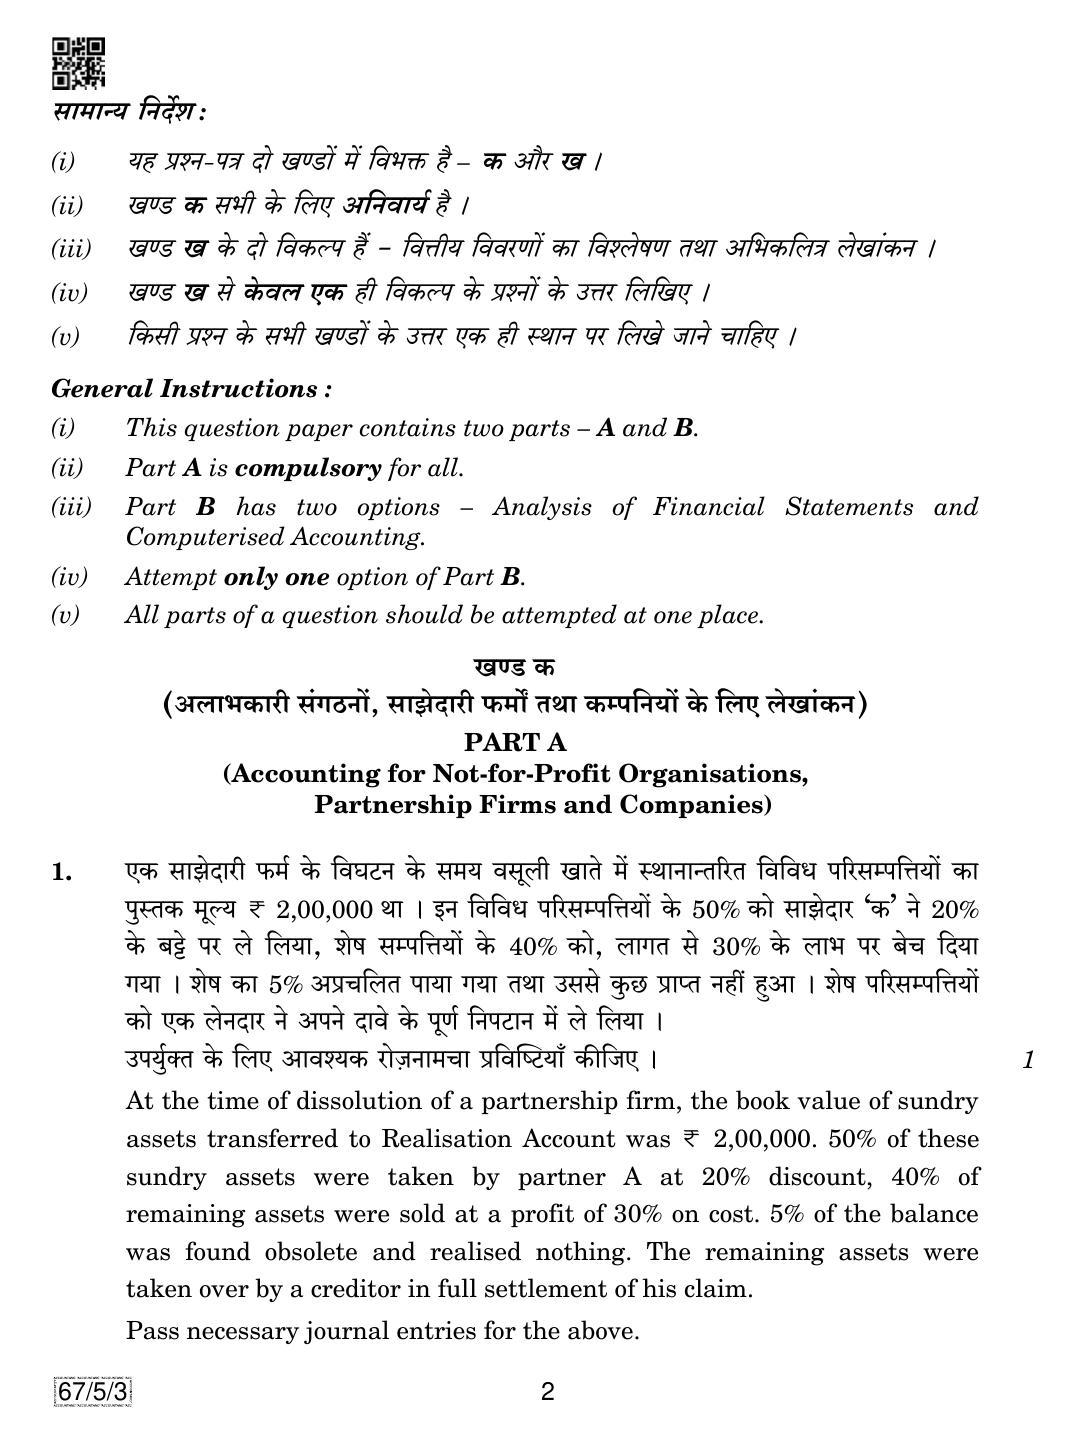 CBSE Class 12 67-5-3 Accountancy 2019 Question Paper - Page 2